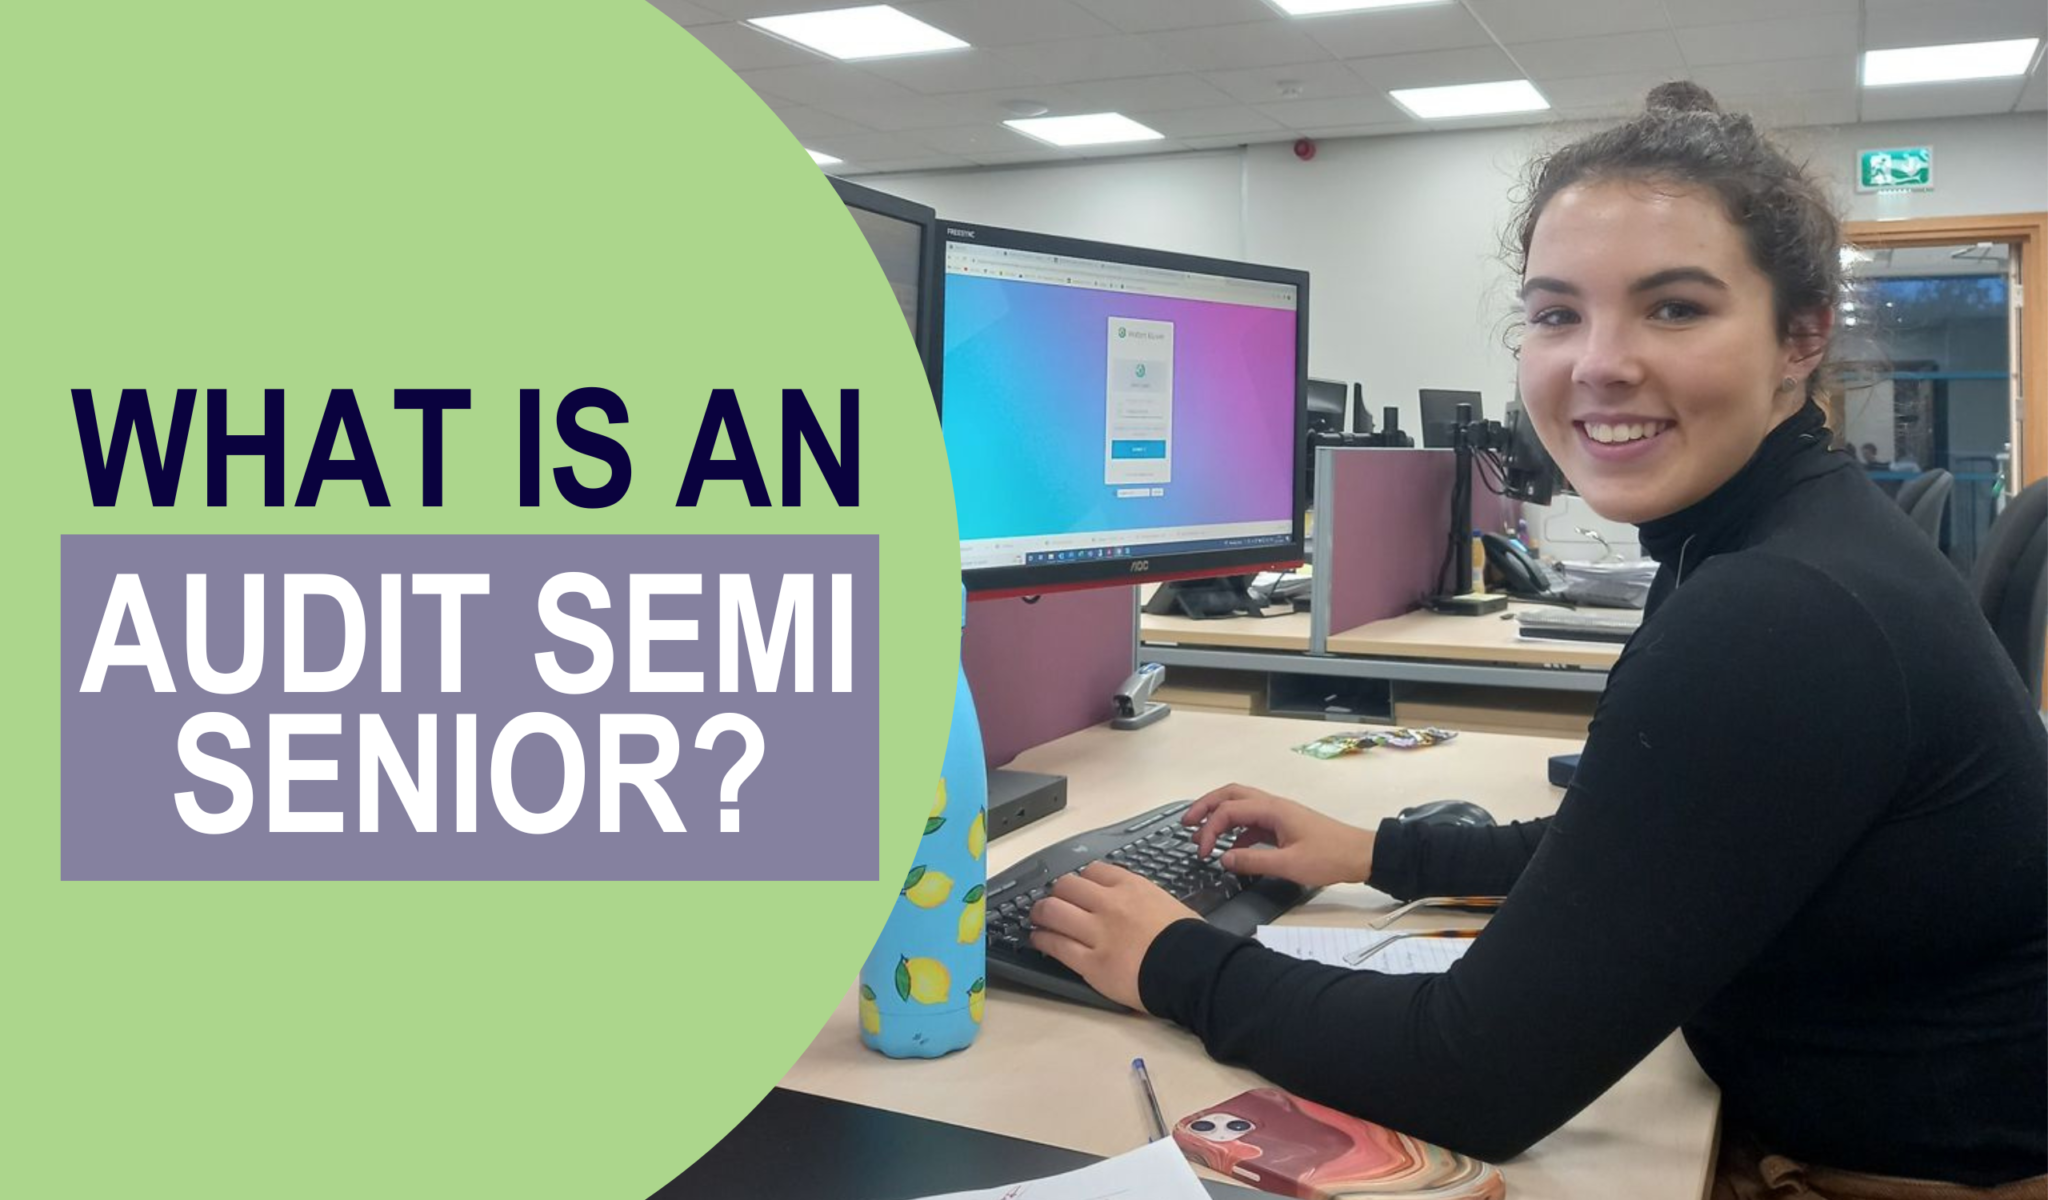 WHAT IS AN AUDIT SEMI SENIOR?